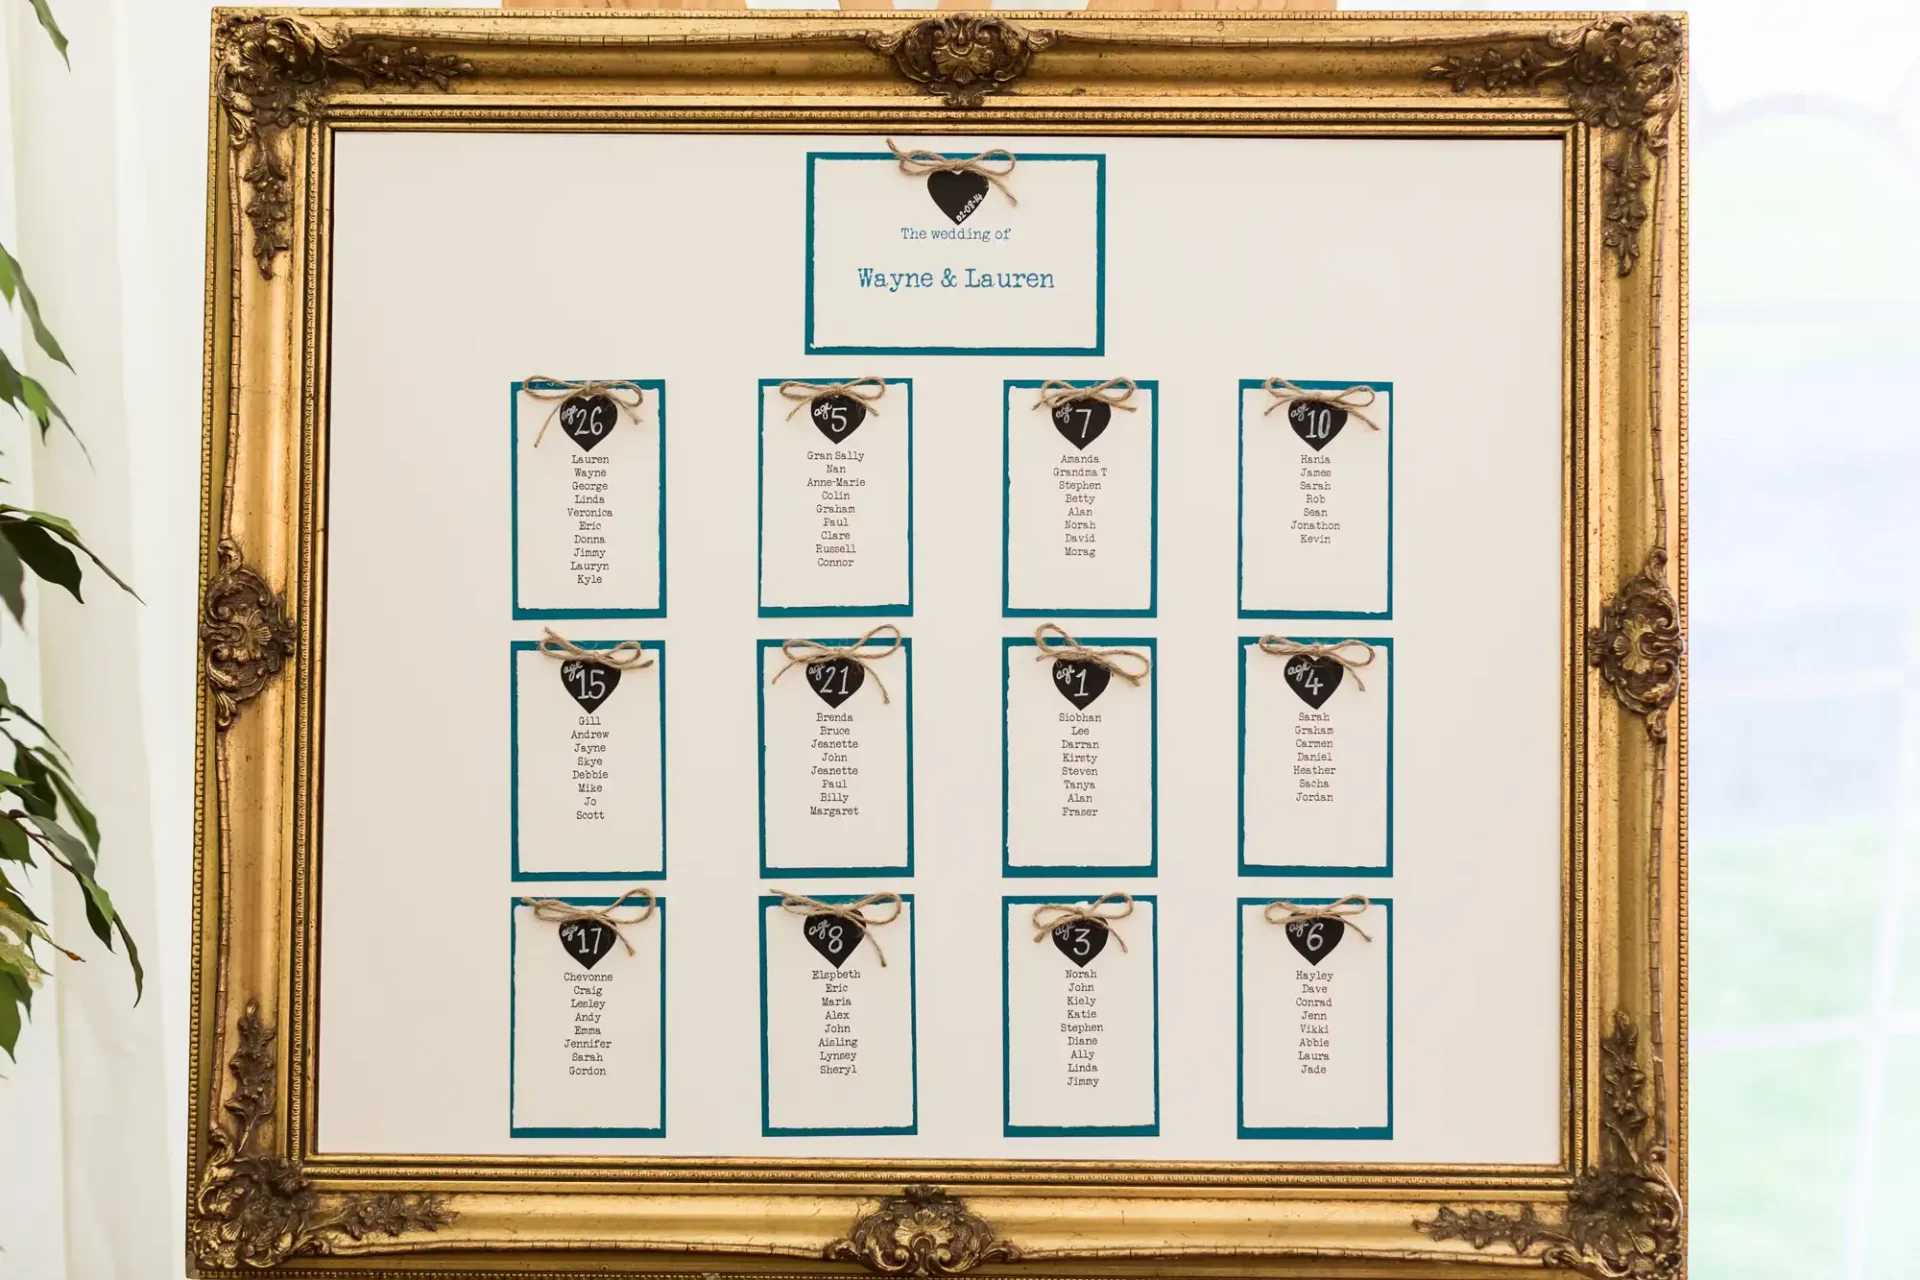 Ornate gold-framed seating chart for a wedding, featuring elegantly printed tables and guest names on a pale background, prominently displayed at an event.